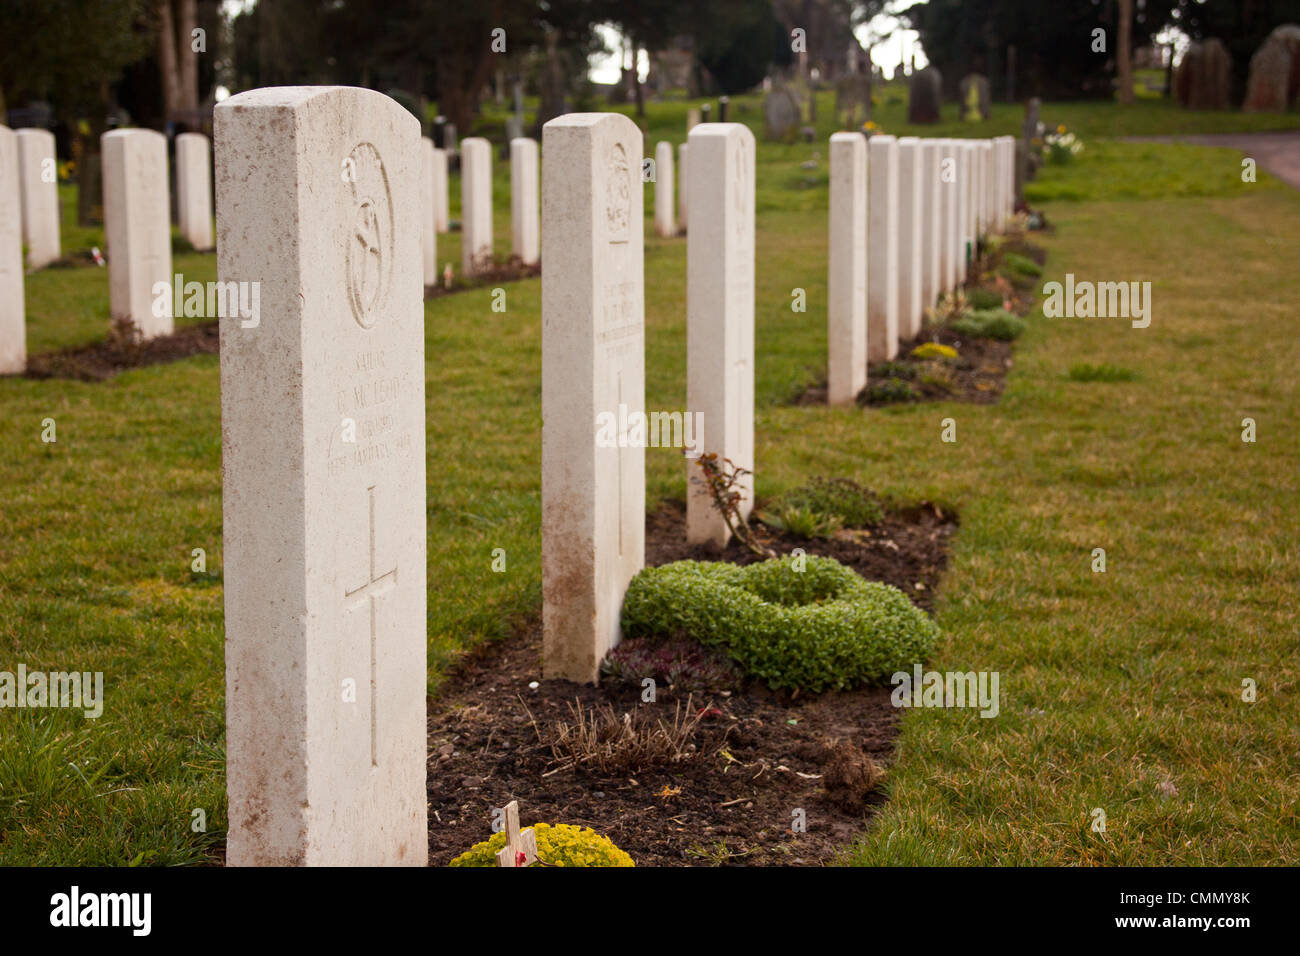 Headstones on military graves in cemetery, newport, wales, uk. Stock Photo